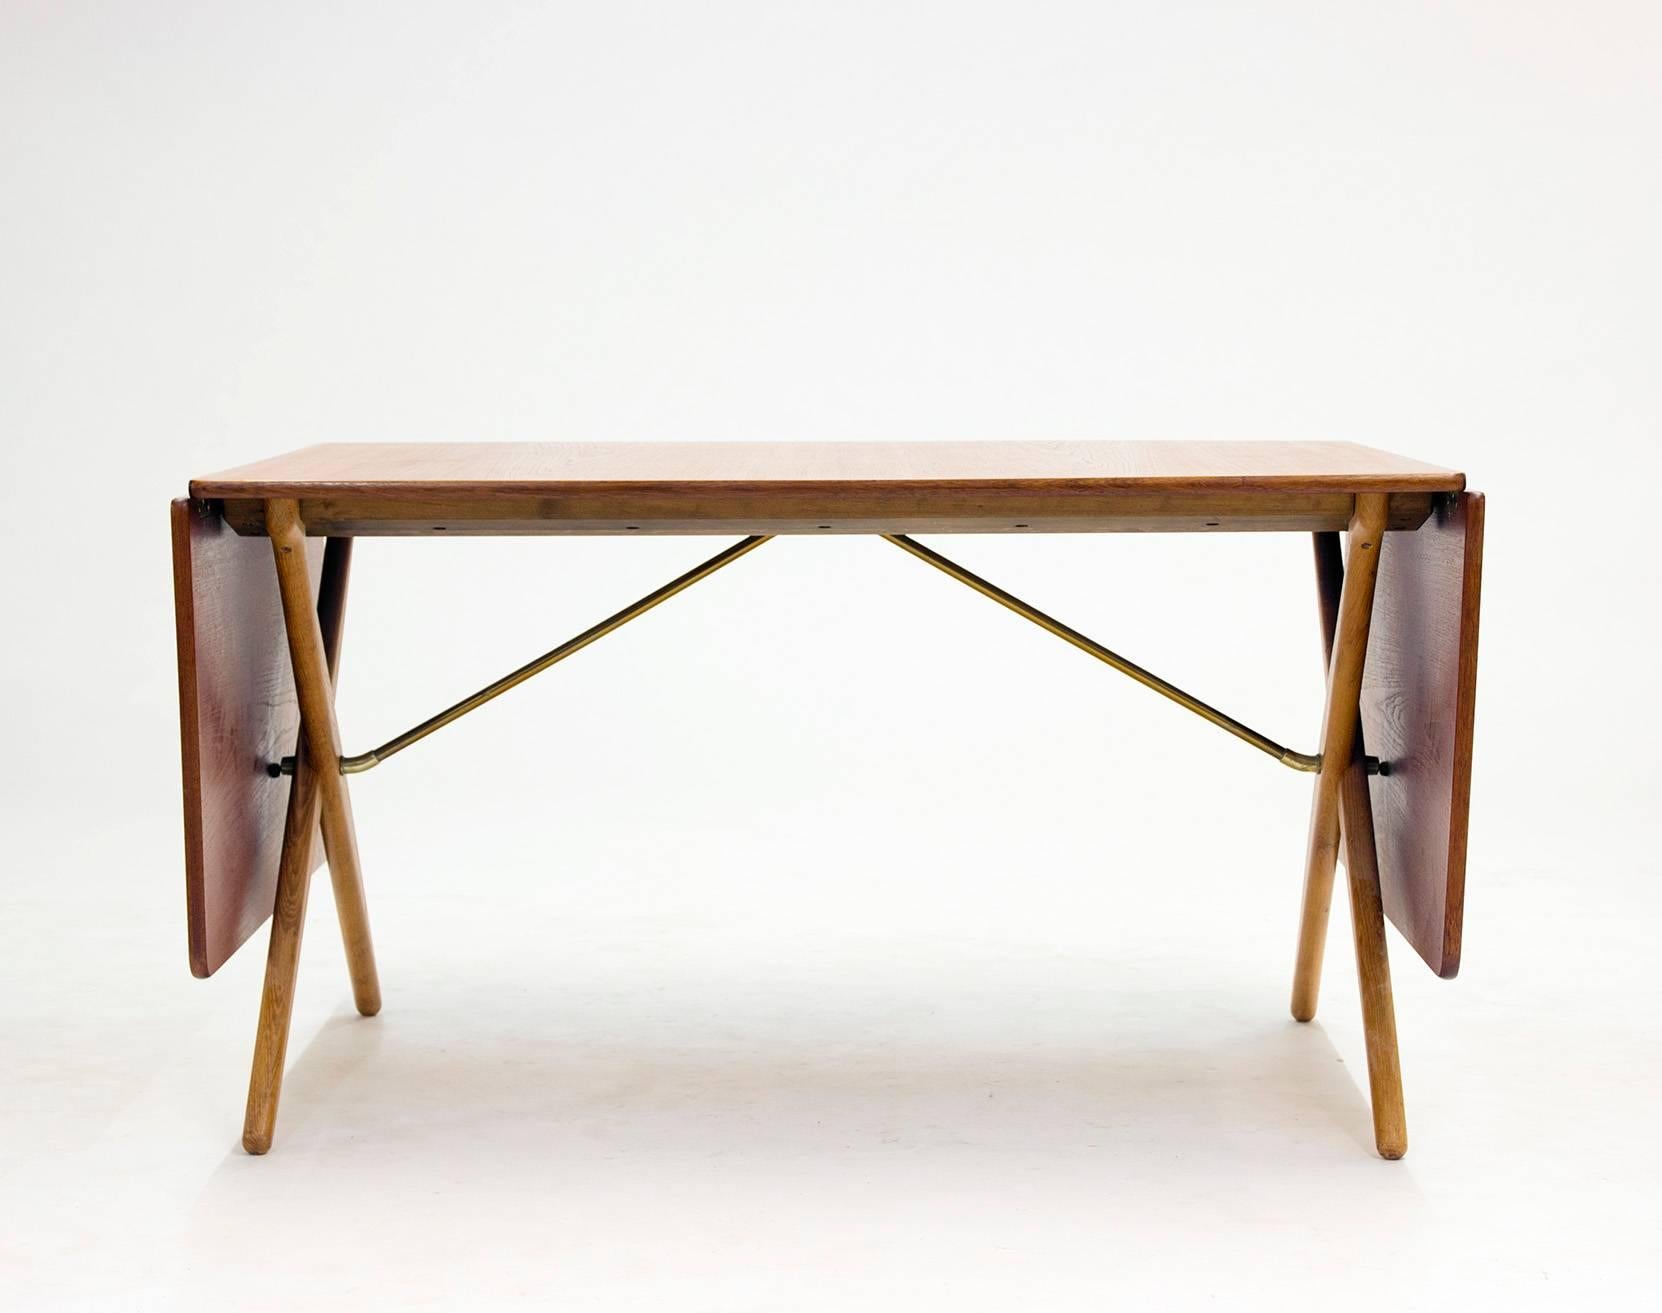 Cool dining table with crossed legs and two flaps that fold out by Hans J. Wegner, model "AT303." Teak table top and oak legs, brass stretchers underneath creating a nice detail.

Drop-leafs are 50 cm each.